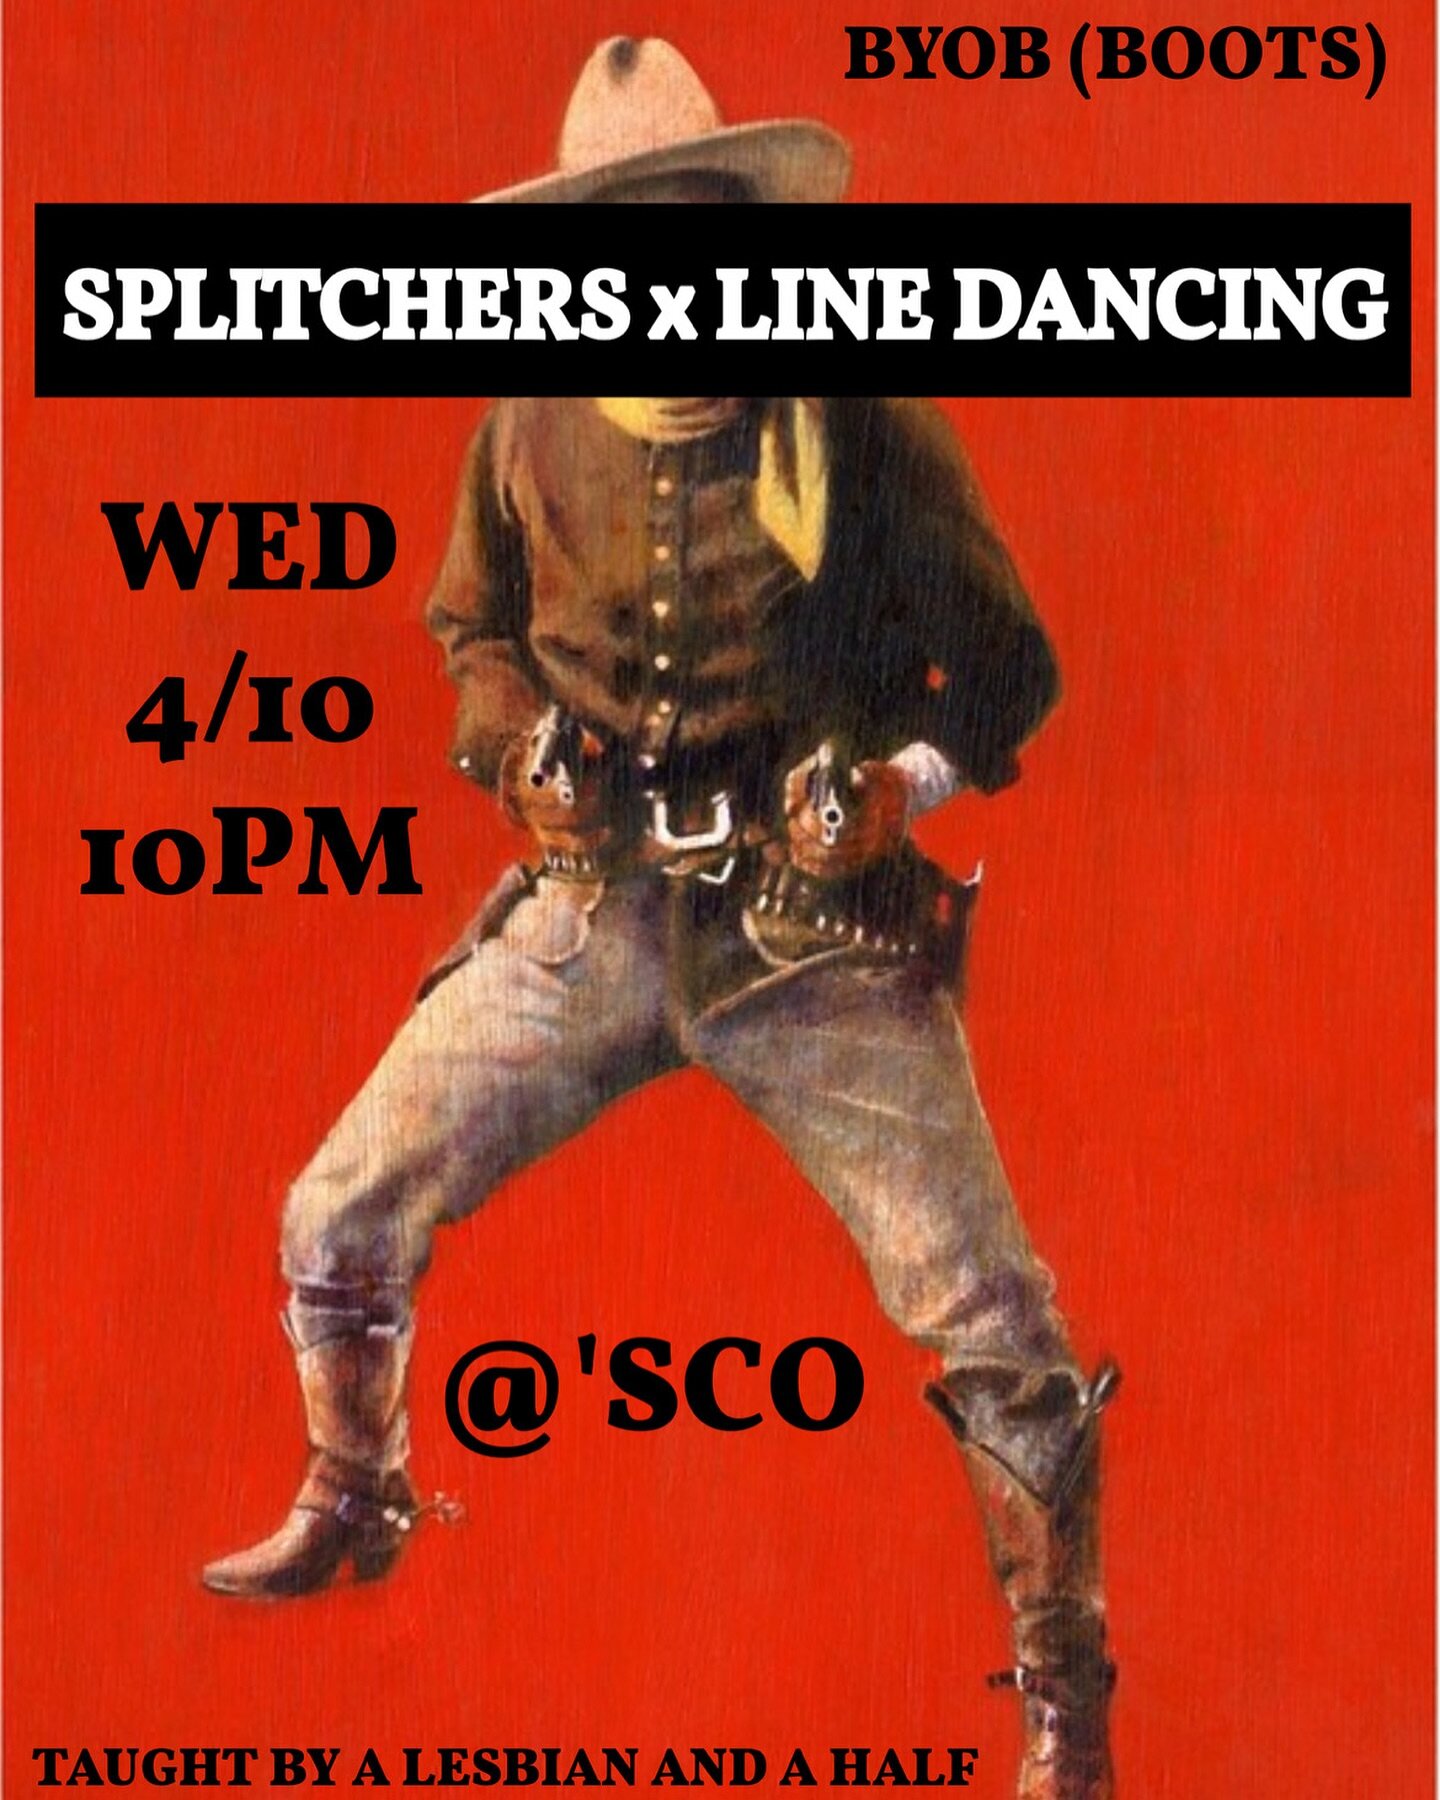 Bust out your boots again Wednesday! Come for the splitchers and stay for the line dances! All levels welcome🪩👢🤠🍻